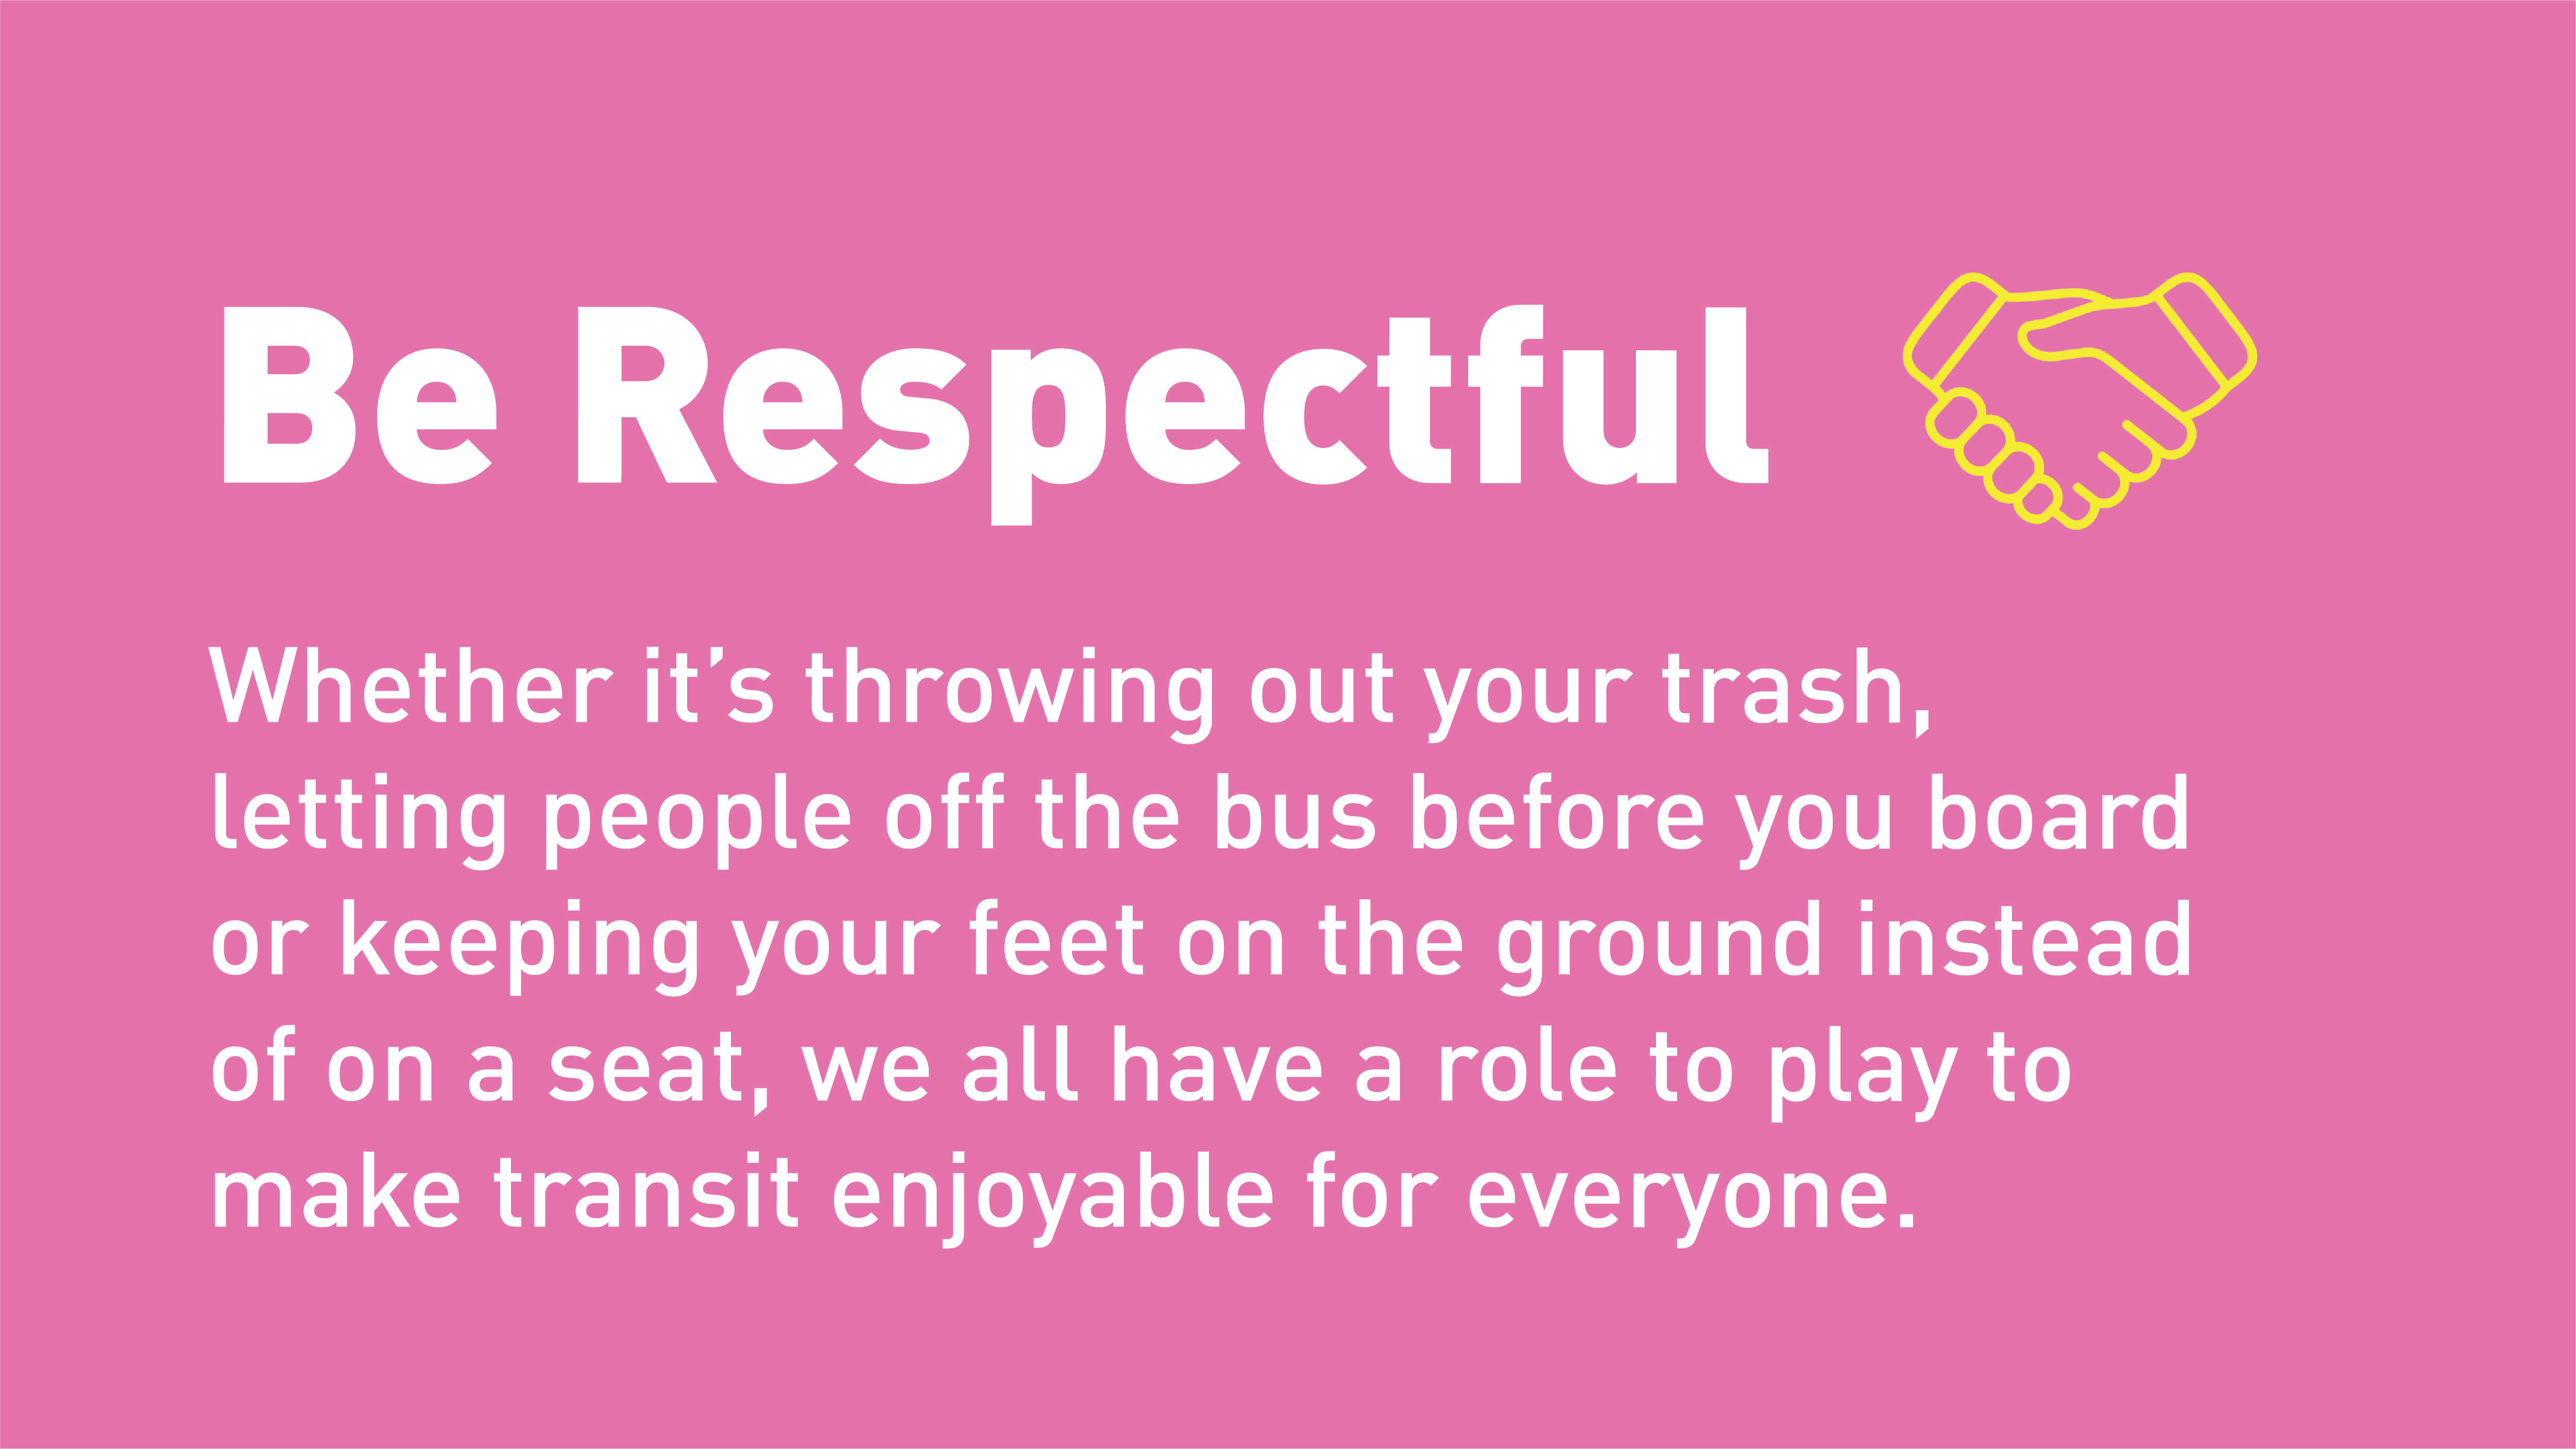 Be Respectful. Don’t litter, let others off first and keep your feet on the ground.